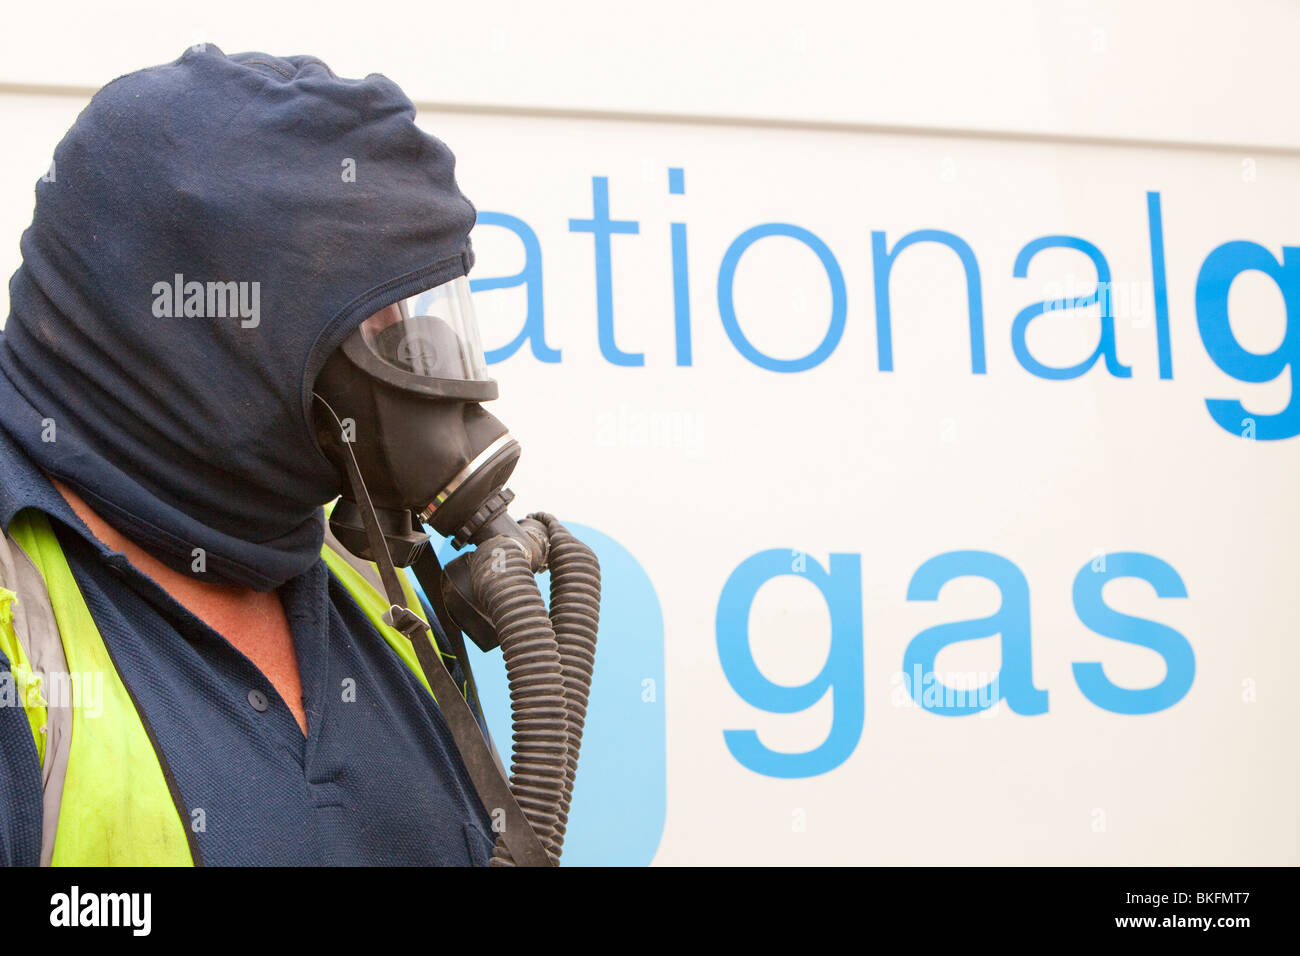 A British Gas worker wears protective gas mask prior to cutting through the gas main as part of an upgrade of piping Stock Photo